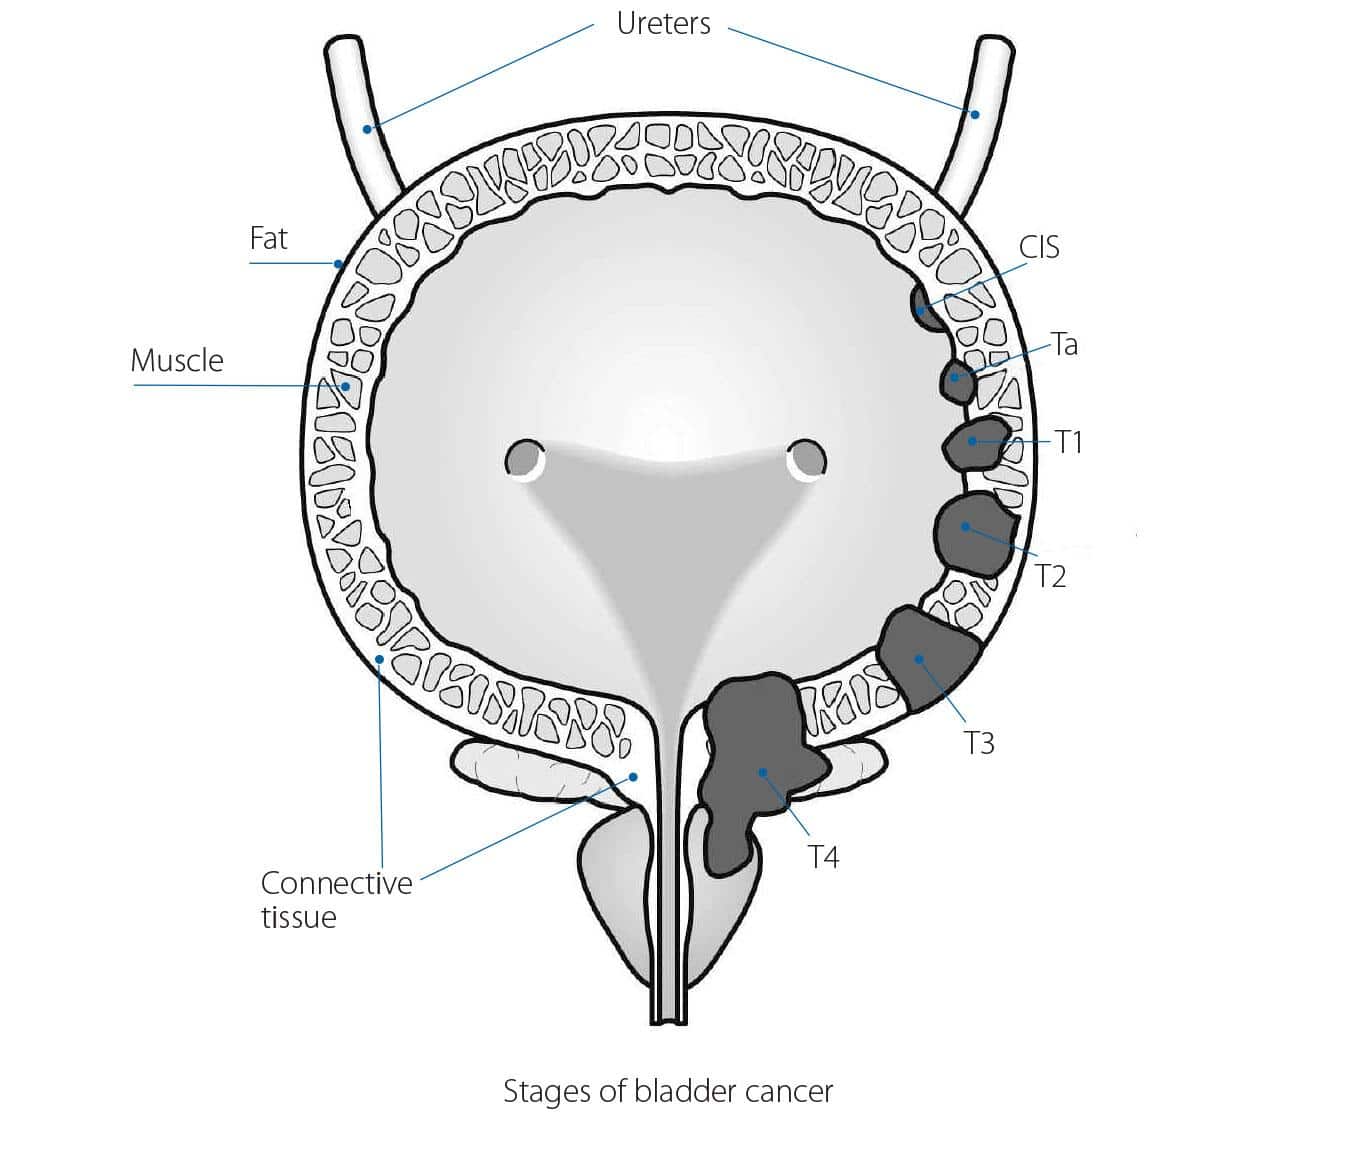 What are the grades and stages of bladder cancer?